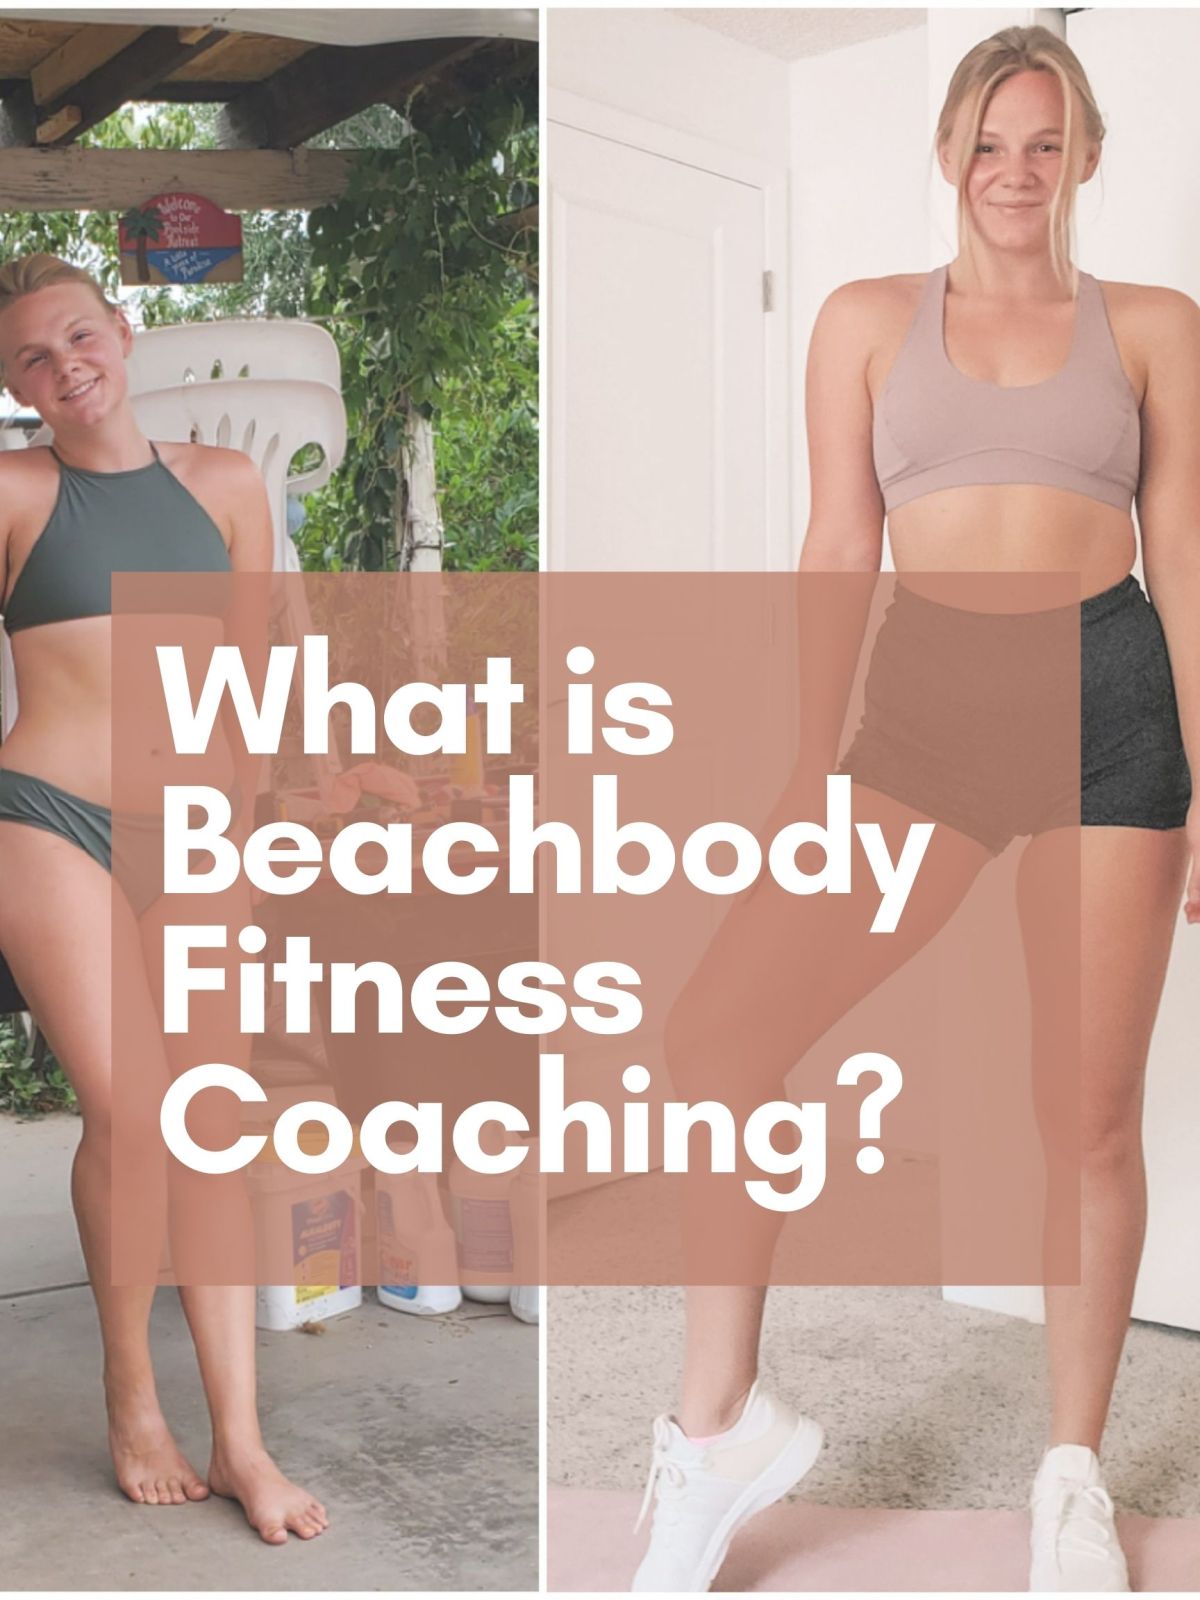 Beachbody Fitness Coaching: What is it, and is it right for you?